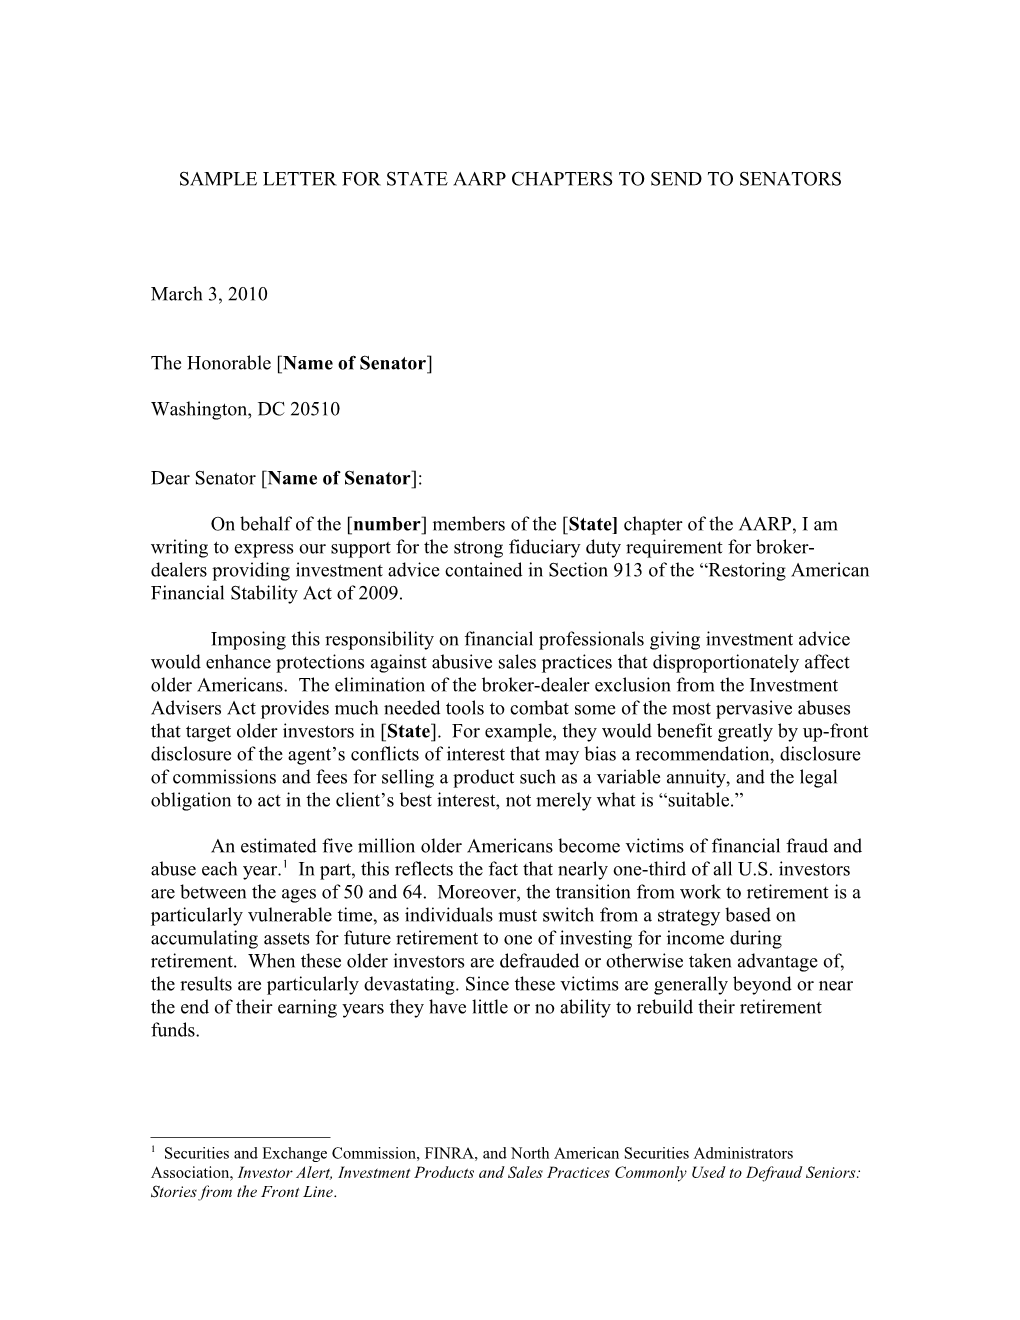 Sample Letter for State Aarp Chapters to Send to Senators